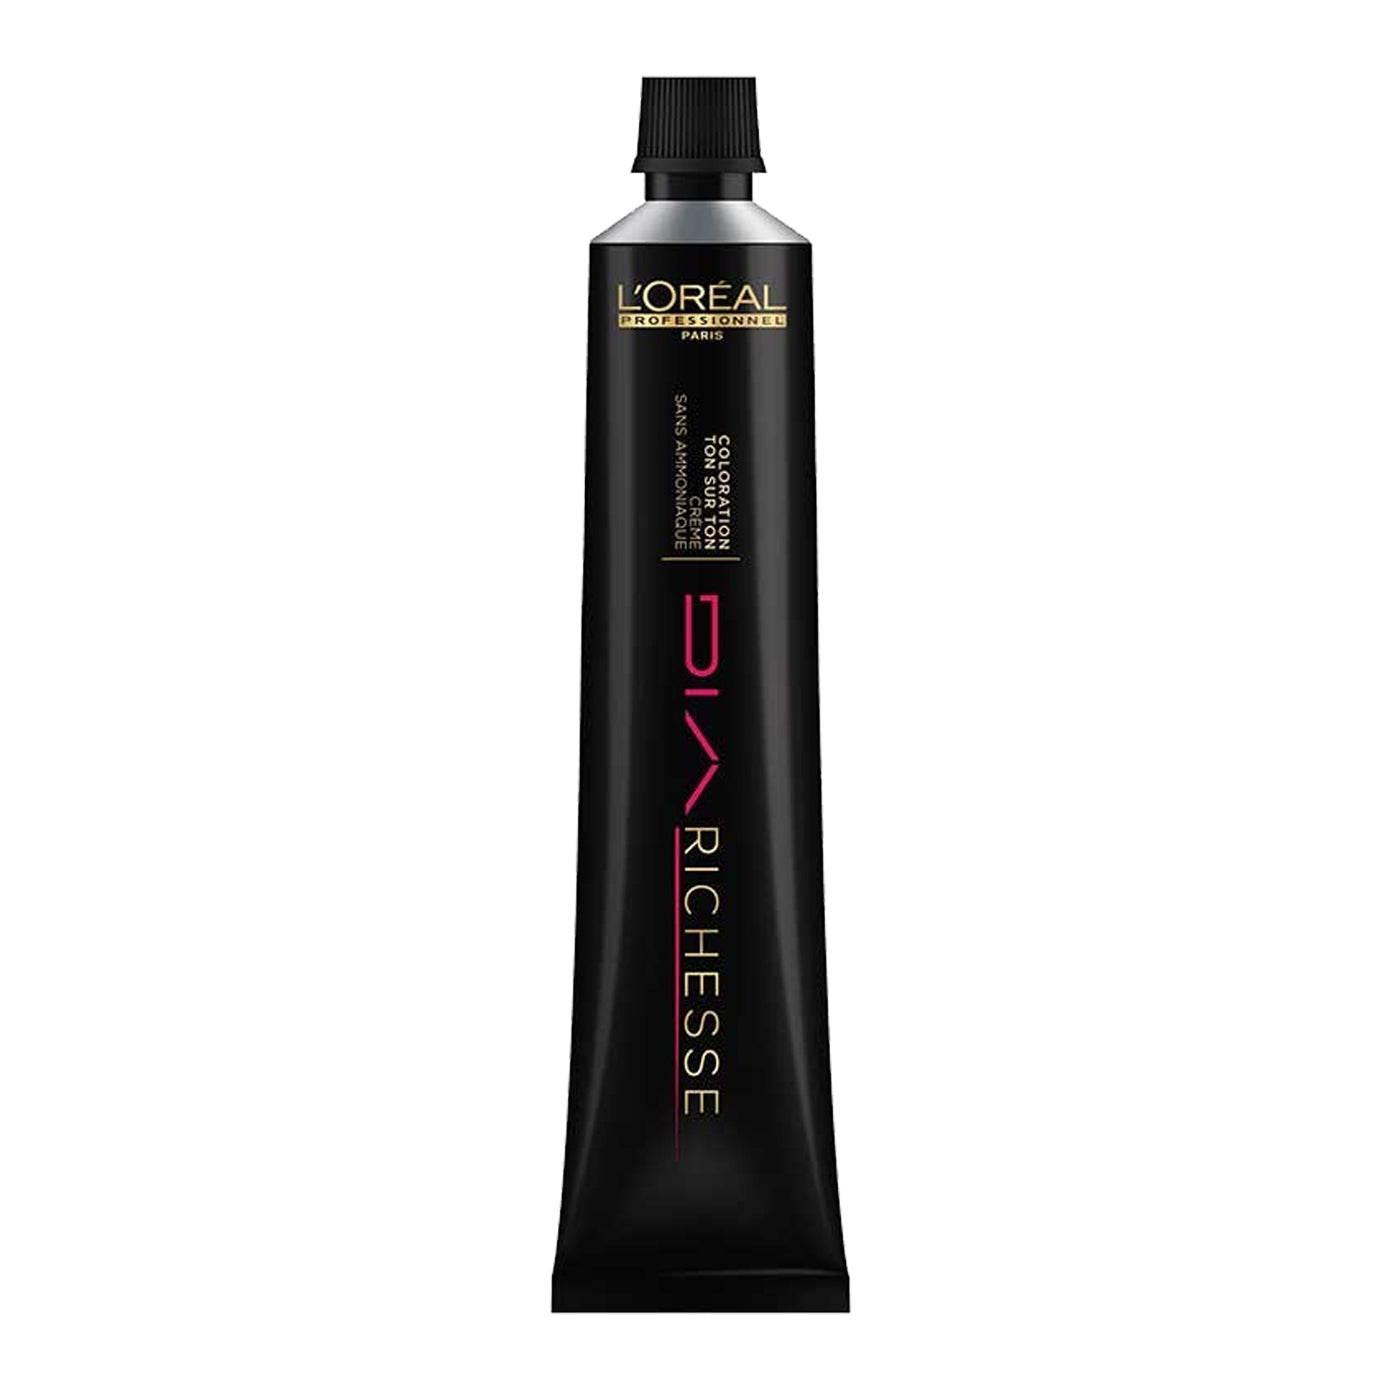 L'Oreal Dia Richesse (50ml) - Ultimate Hair and Beauty